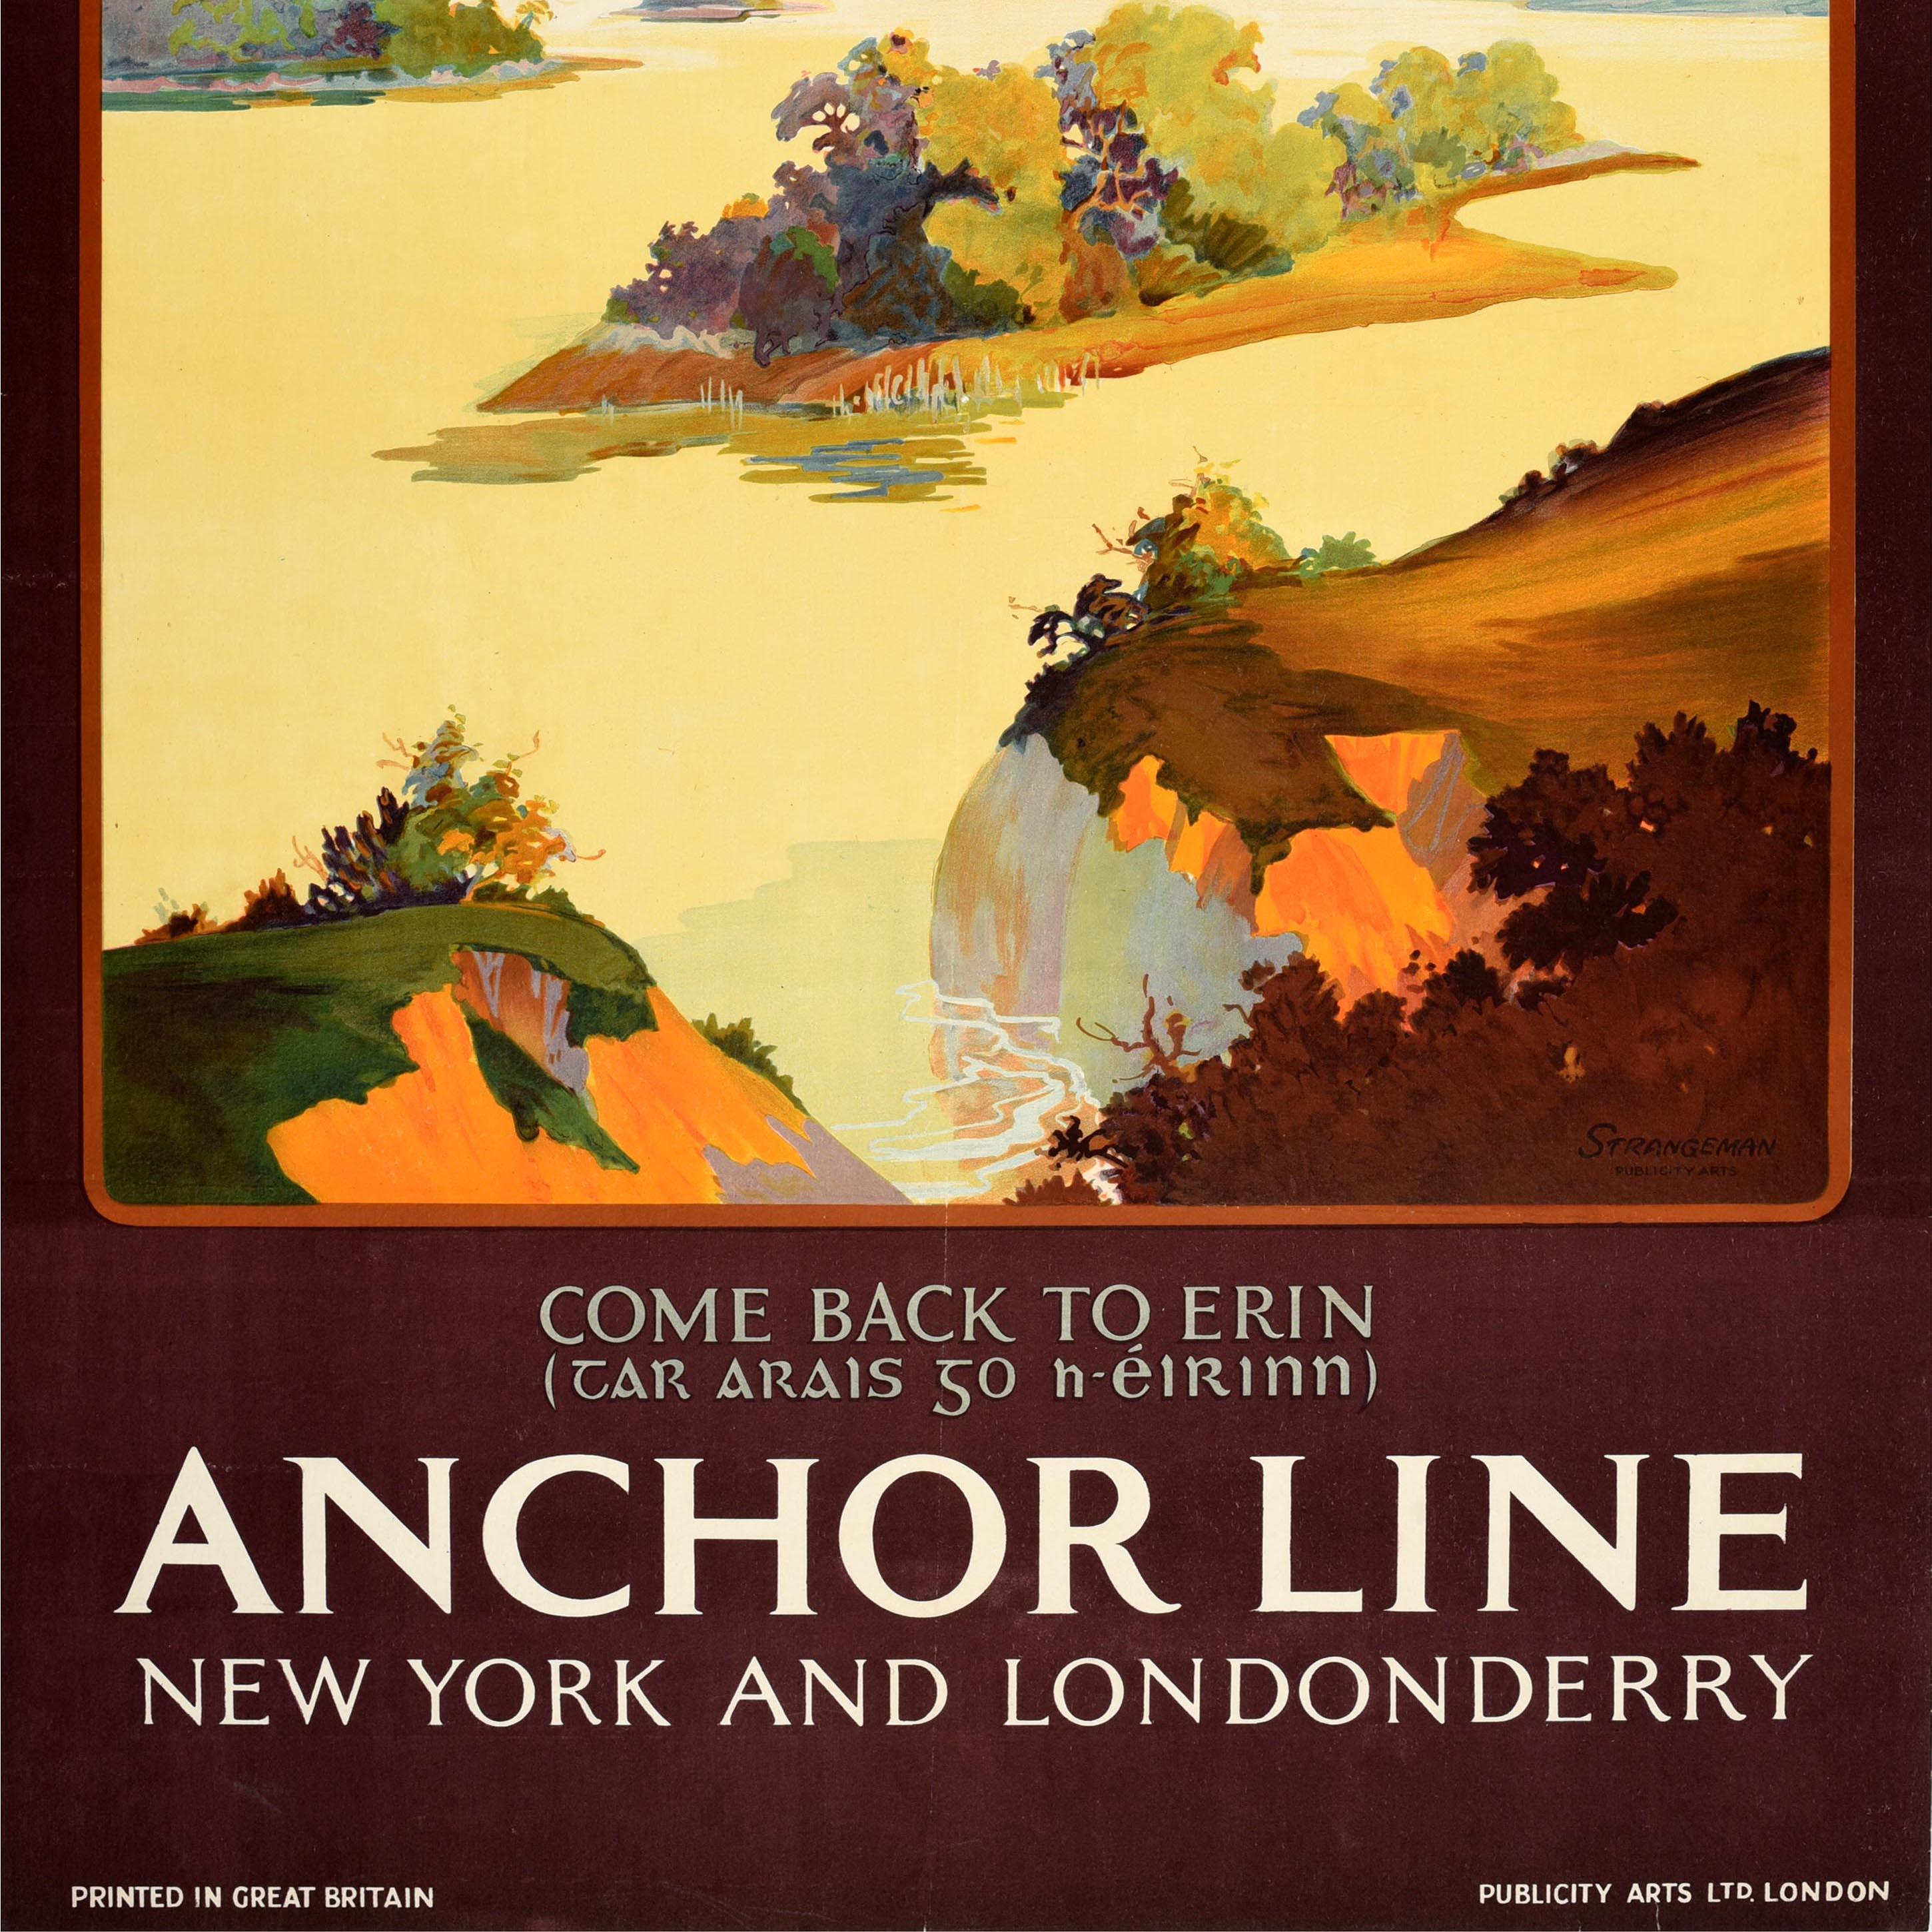 Original vintage travel poster for Ireland - Come Back to Erin - by Anchor Line New York and Londonderry - Design features a lake scene with rolling hills in the background framed by a maroon border with white and green lettering. Printed in Great